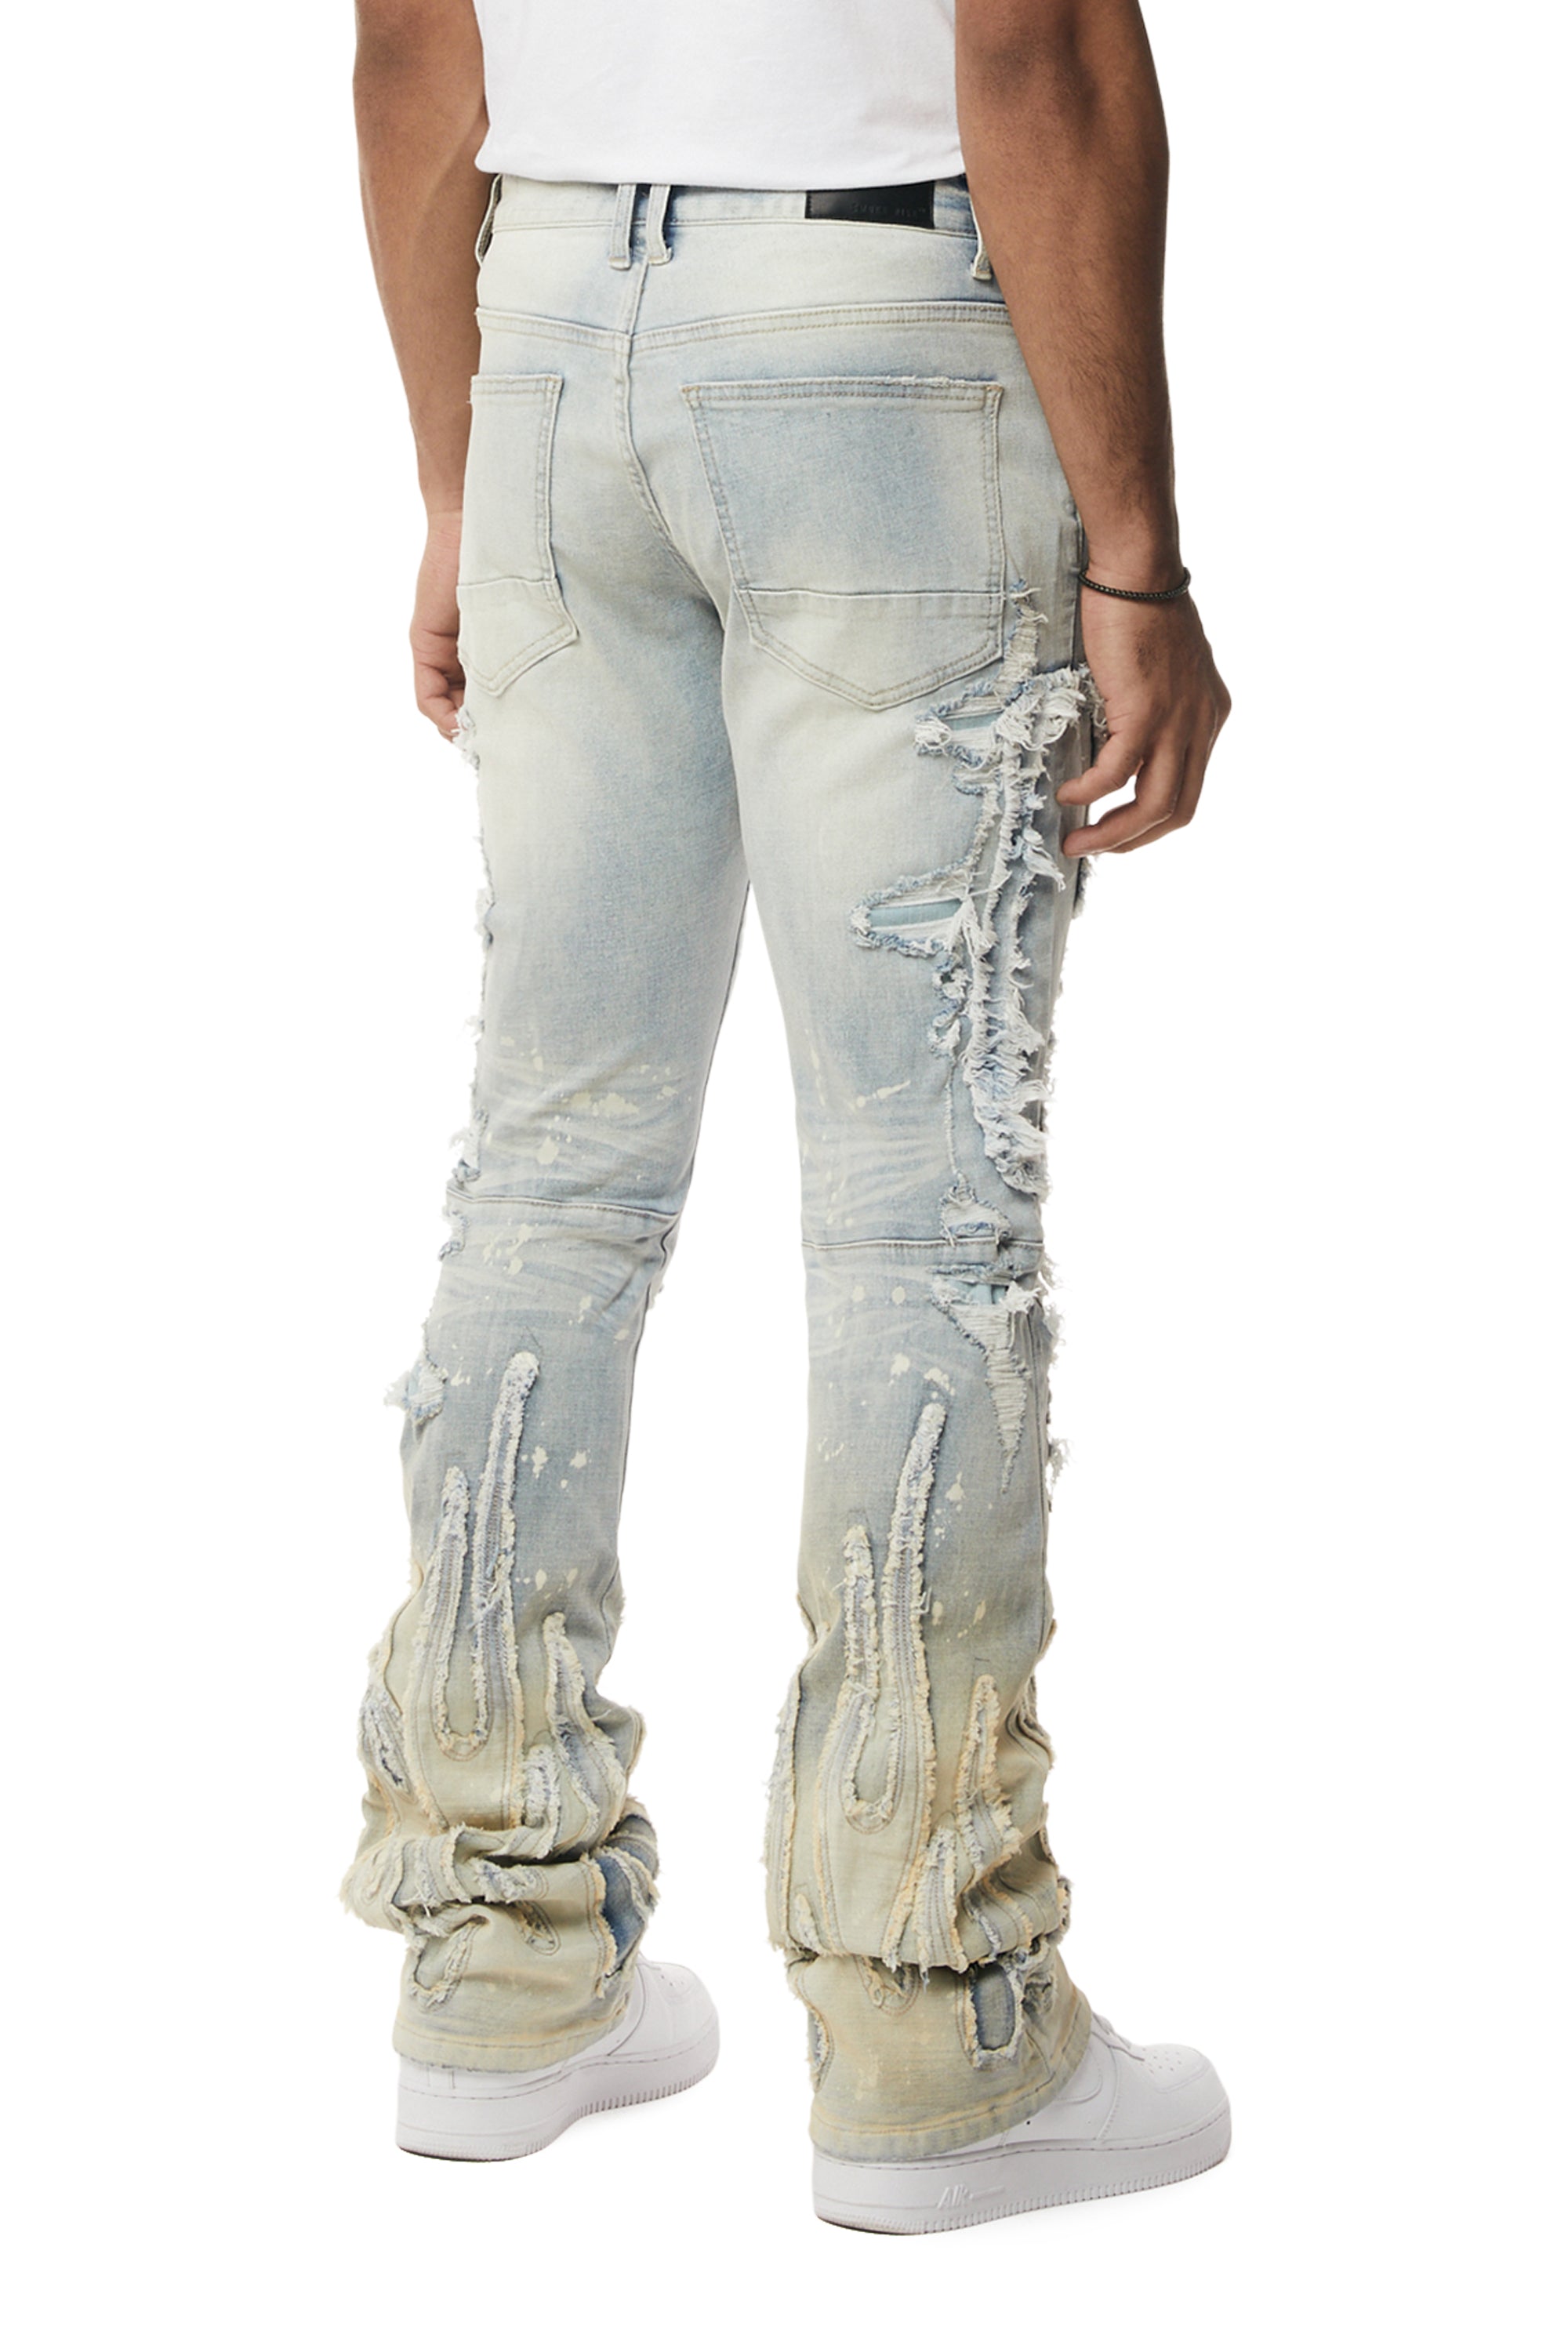 Flame Applique Heavy R&R Stacked Denim Jeans - Ombre Blue